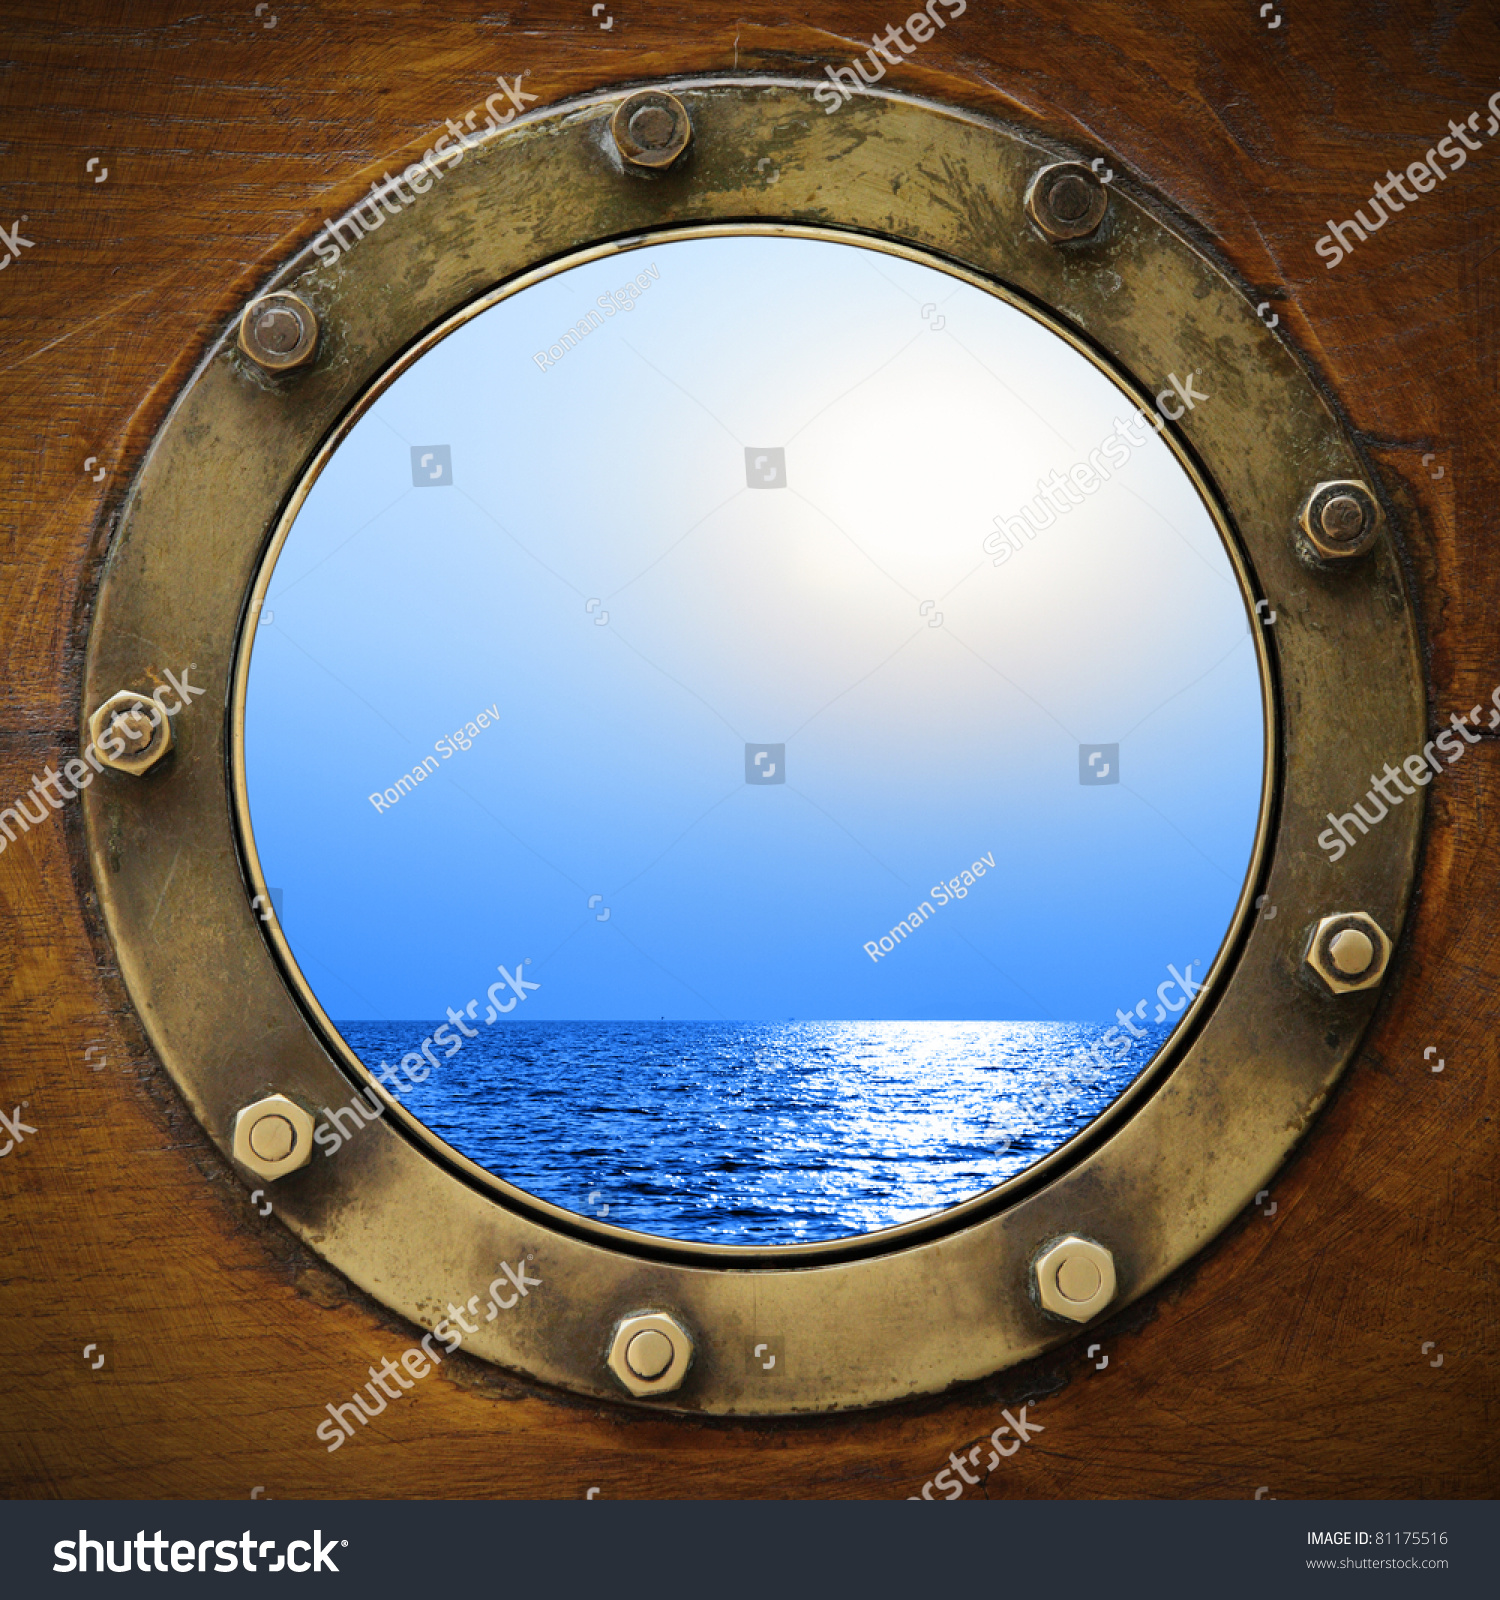 Boat porthole with ocean view close up #81175516